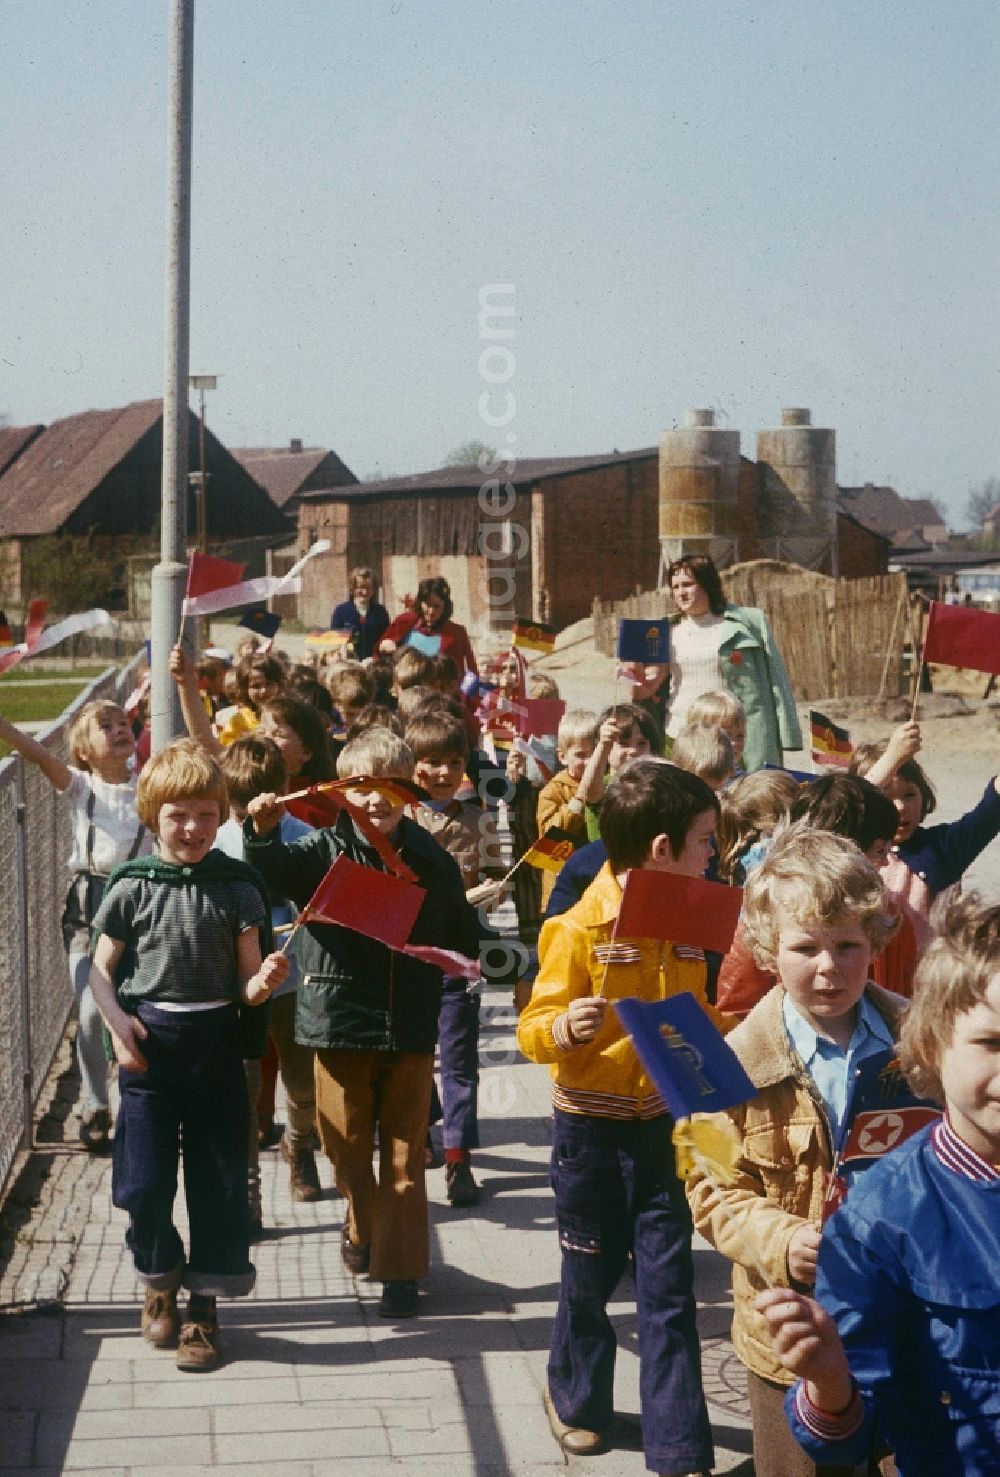 Neustrelitz: A nursery school group, with balloons and flags, on the way to May 1 demonstration in Neustrelitz in Mecklenburg-Vorpommern in the territory of the former GDR, German Democratic Republic